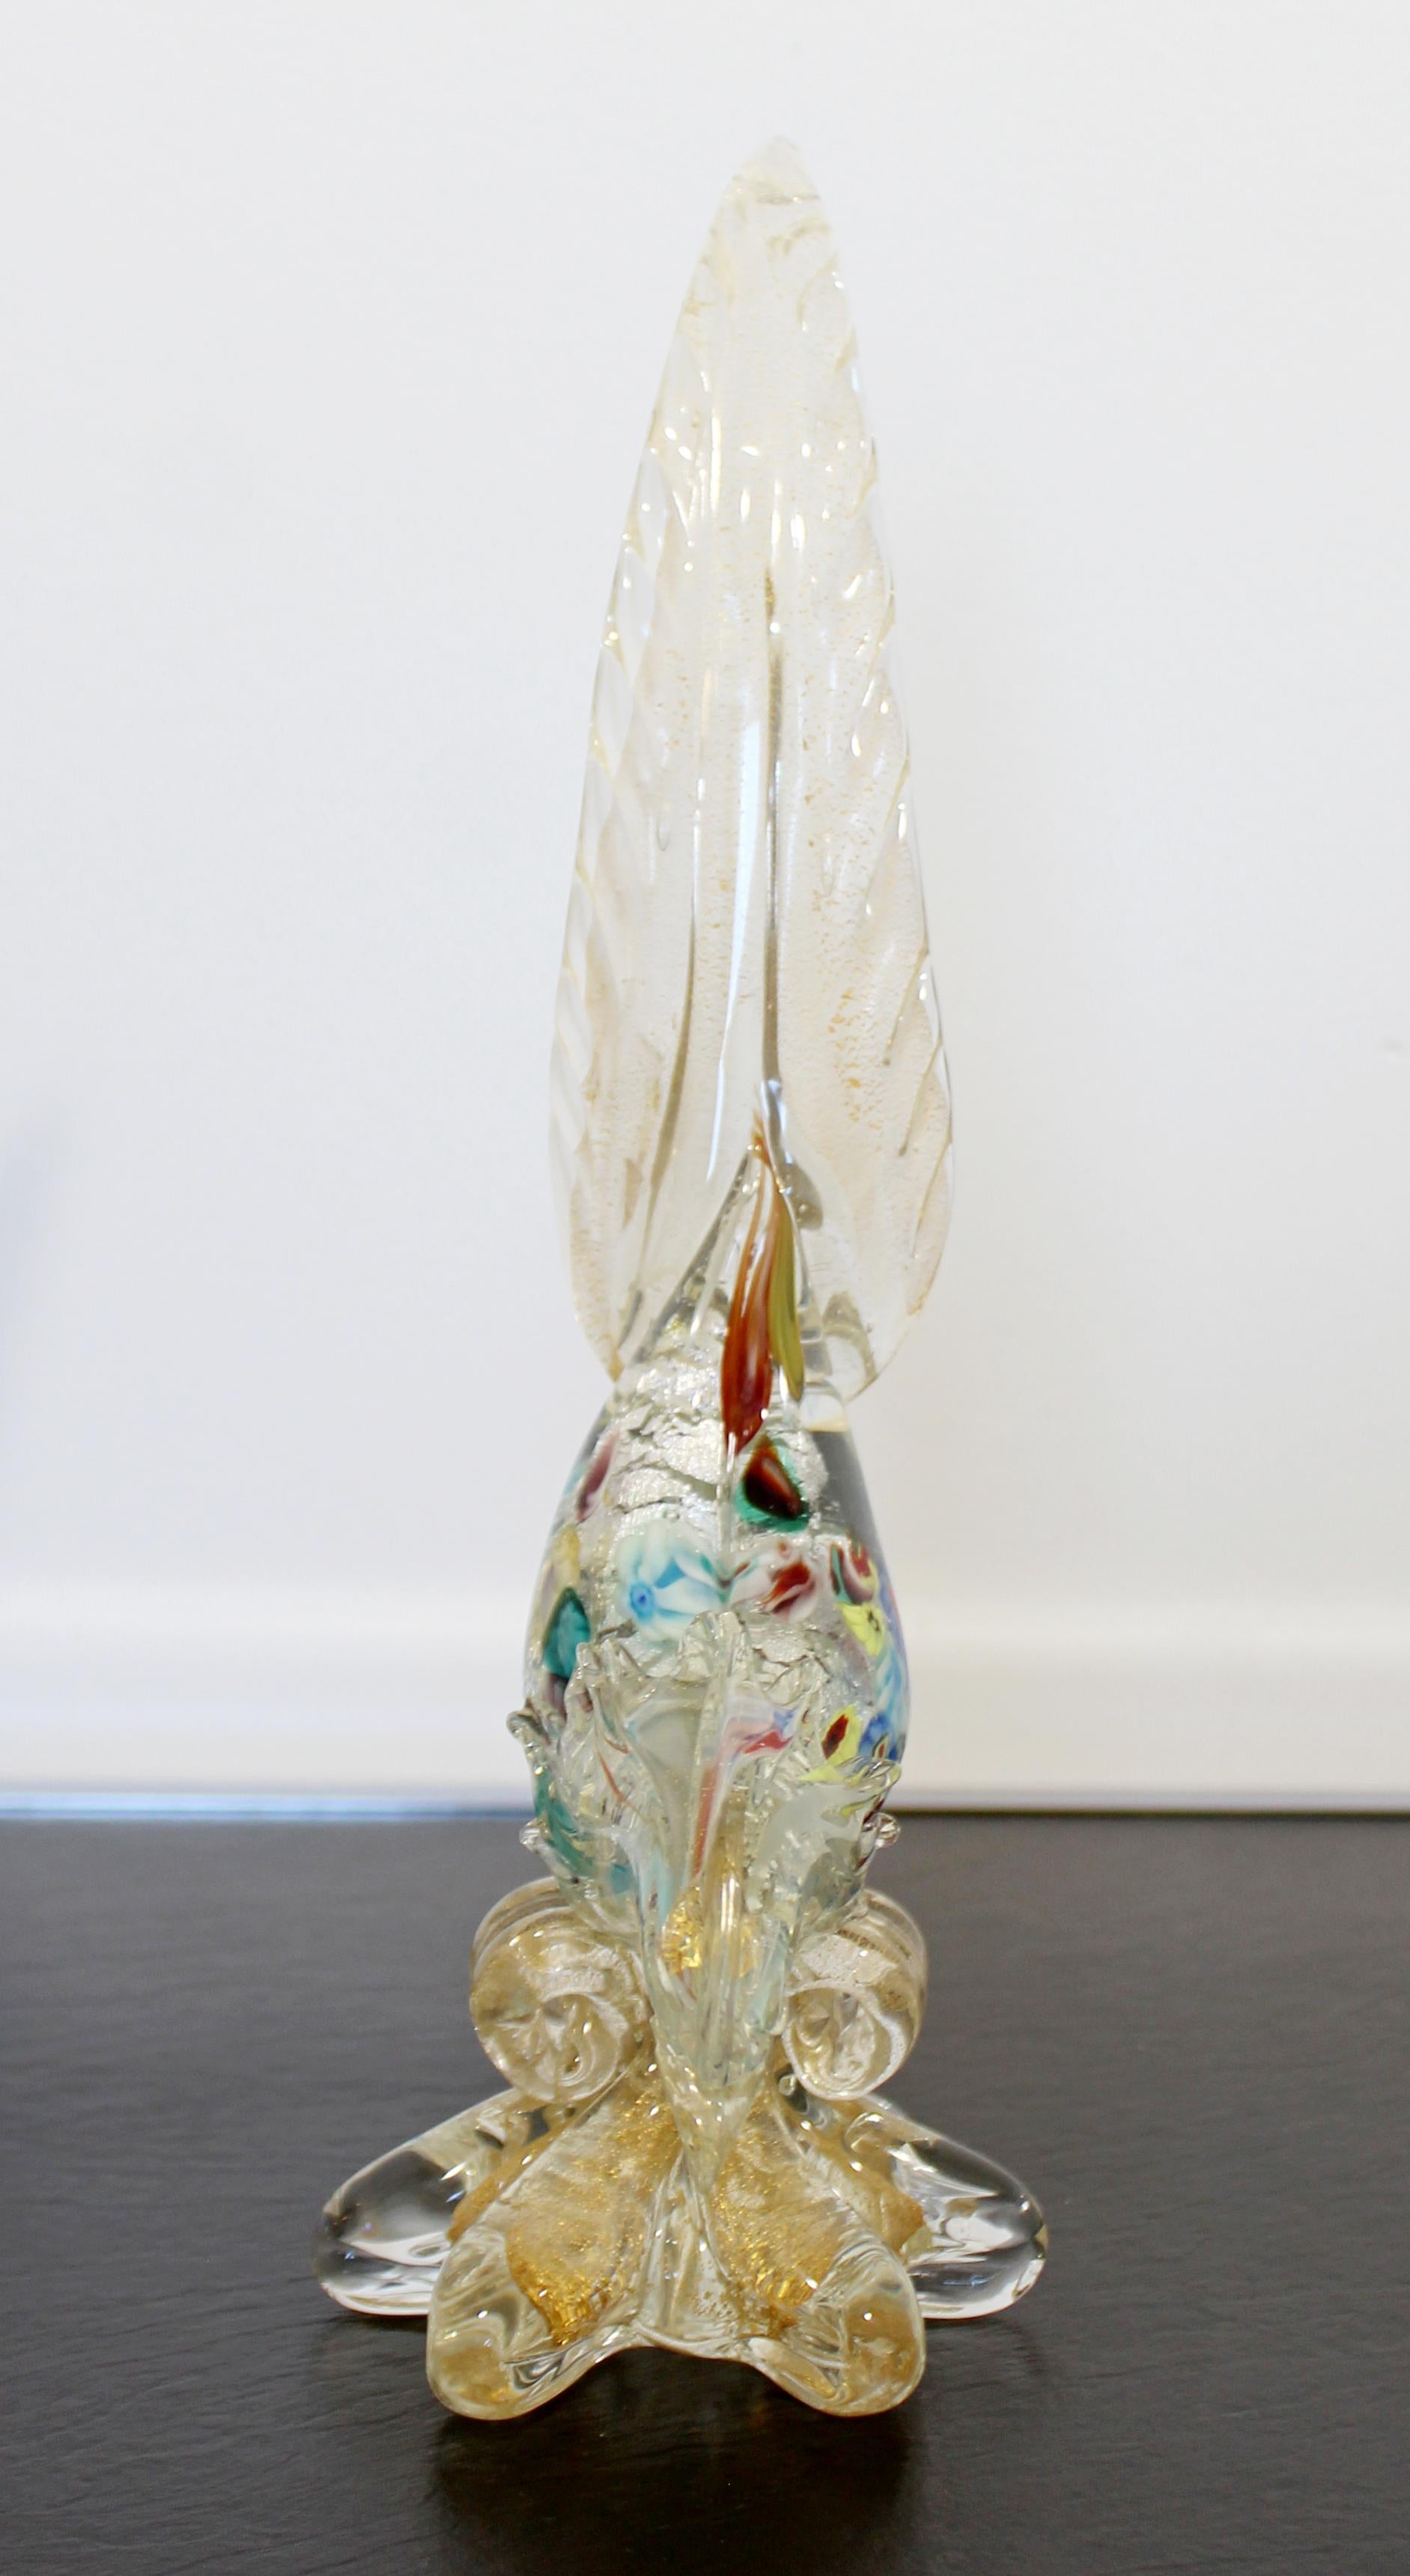 For your consideration is a stirking, Murano glass pheasant table sculpture, by Archemide Seguso, made in Italy, circa 1950s. In excellent condition. The dimensions are 8